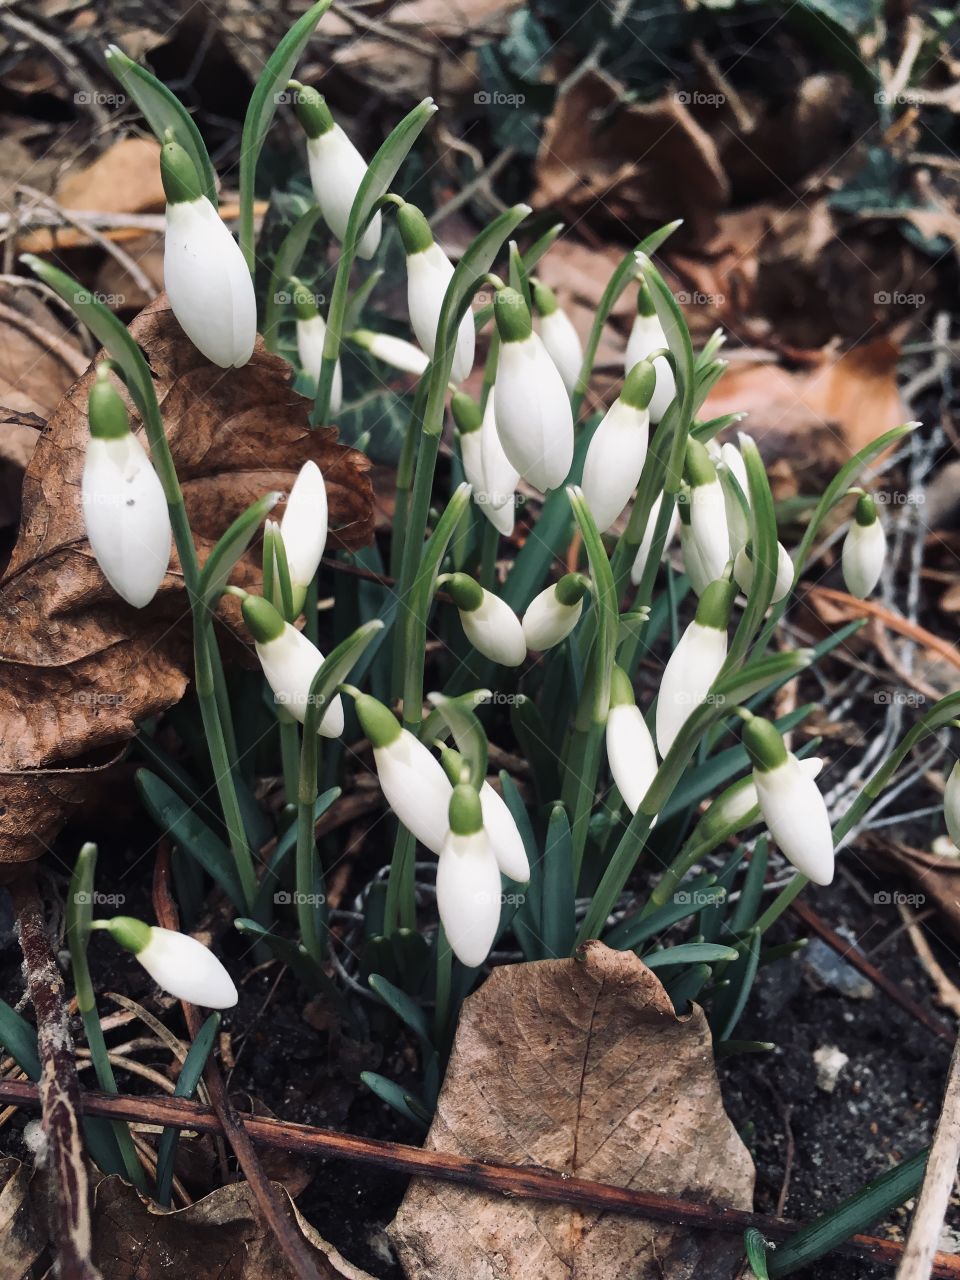 Snowdrops are blossoming, it’s soon spring. 